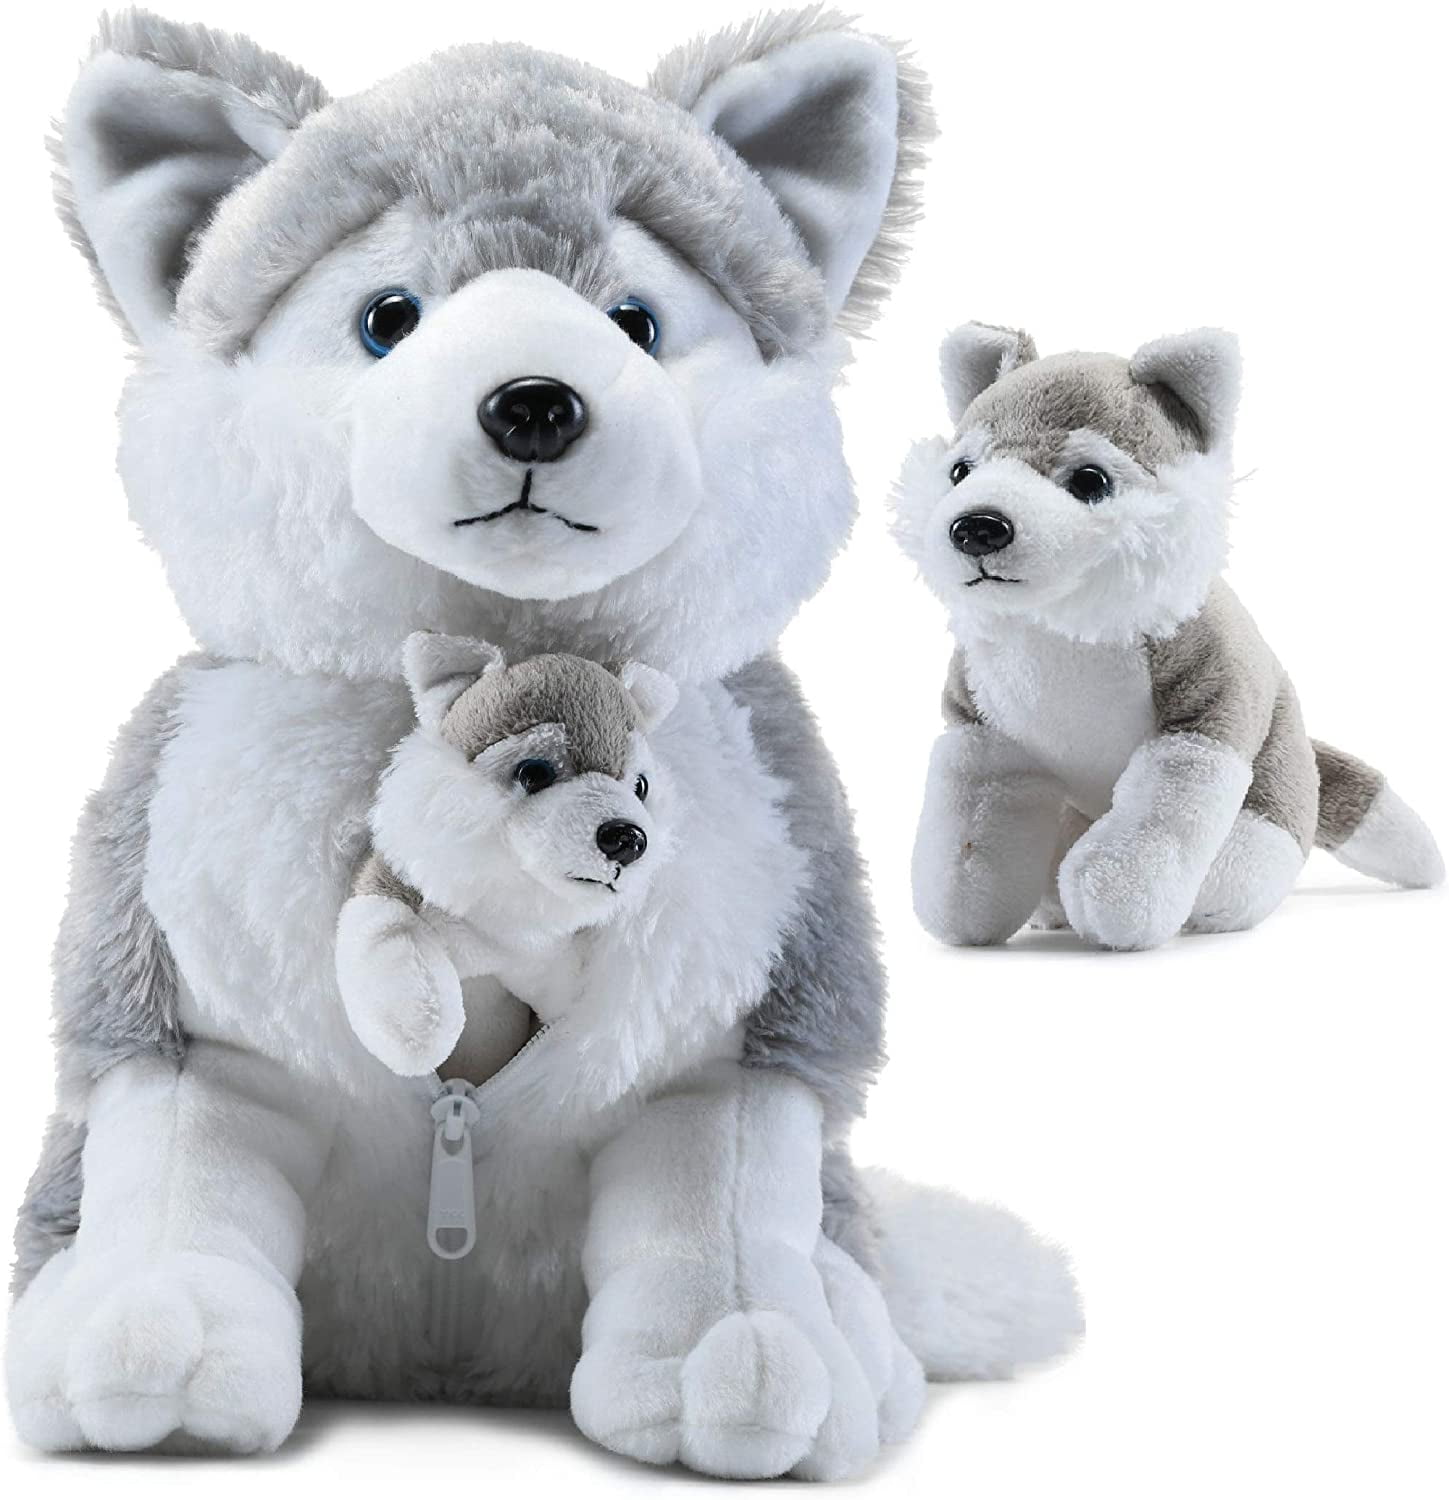 Plush Grey Husky Dog with Zippered Pouch for Its 2 Little Plush Baby Dogs  Puppies - Plushlings Collection Soft Stuffed Animal Playset 